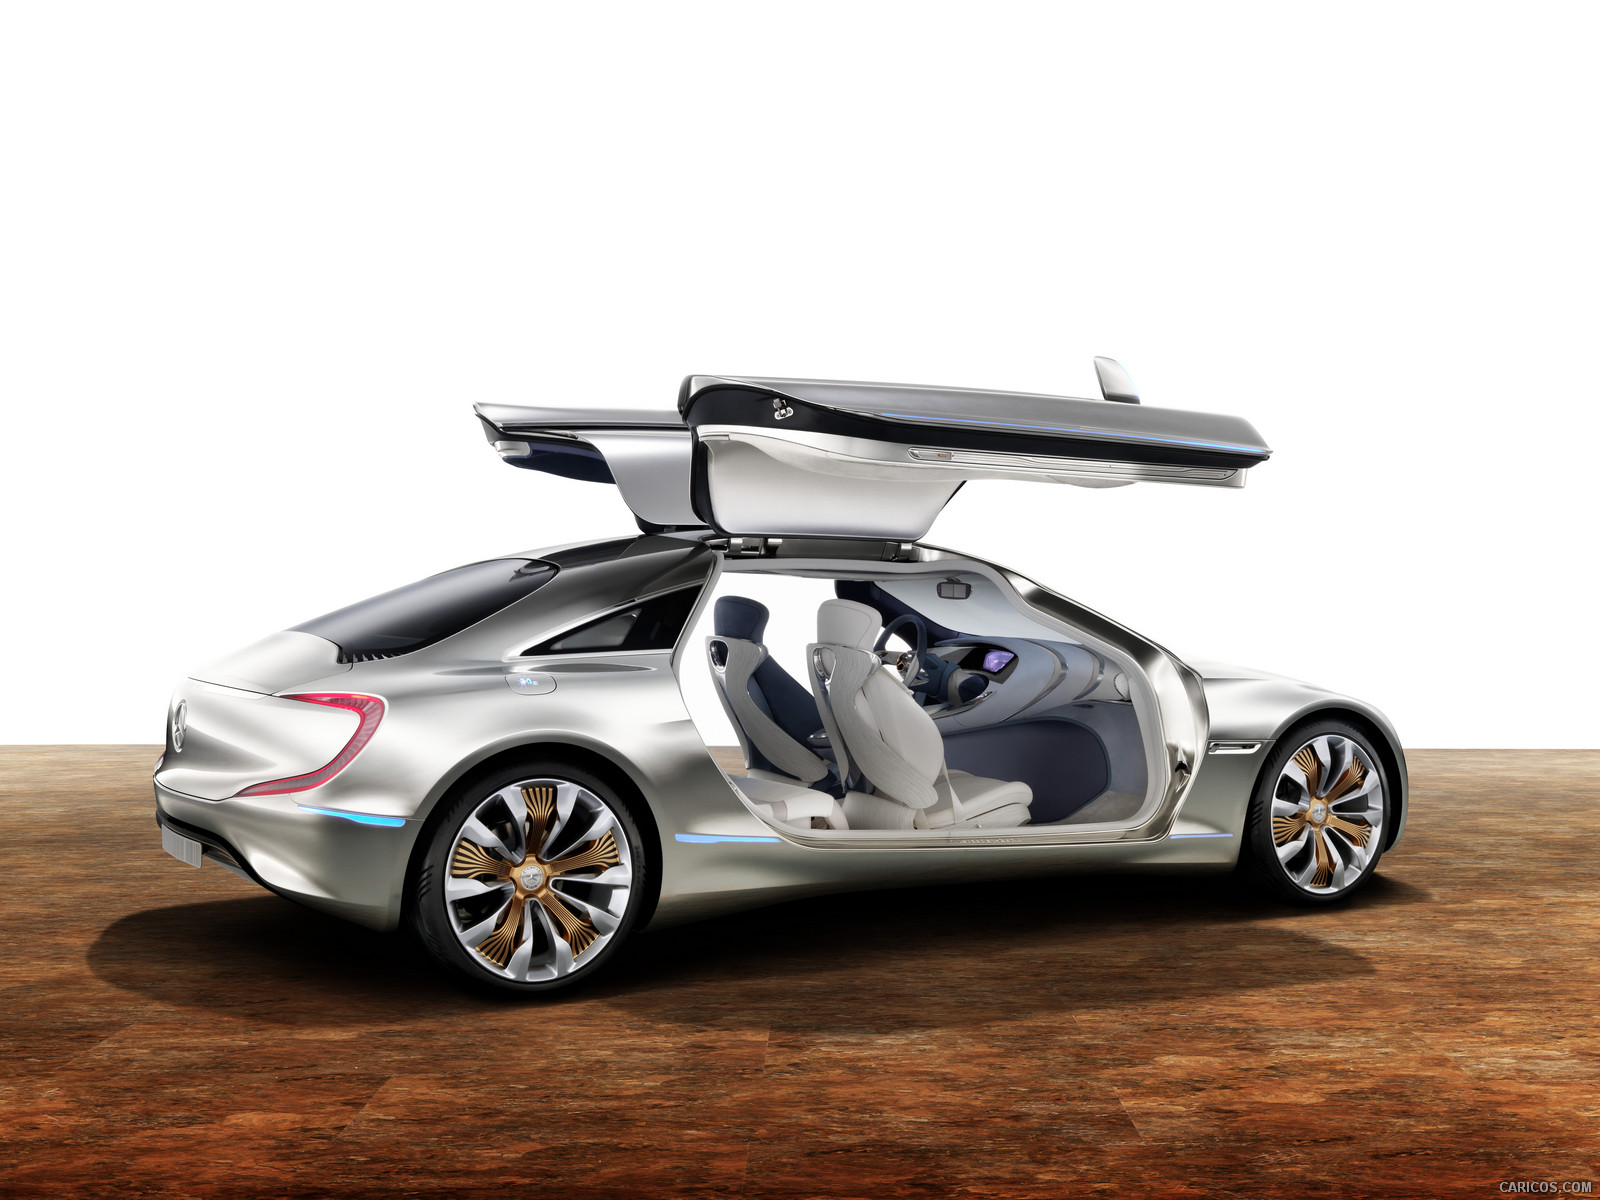 Mercedes-Benz F 125 Concept  - Side, #23 of 63